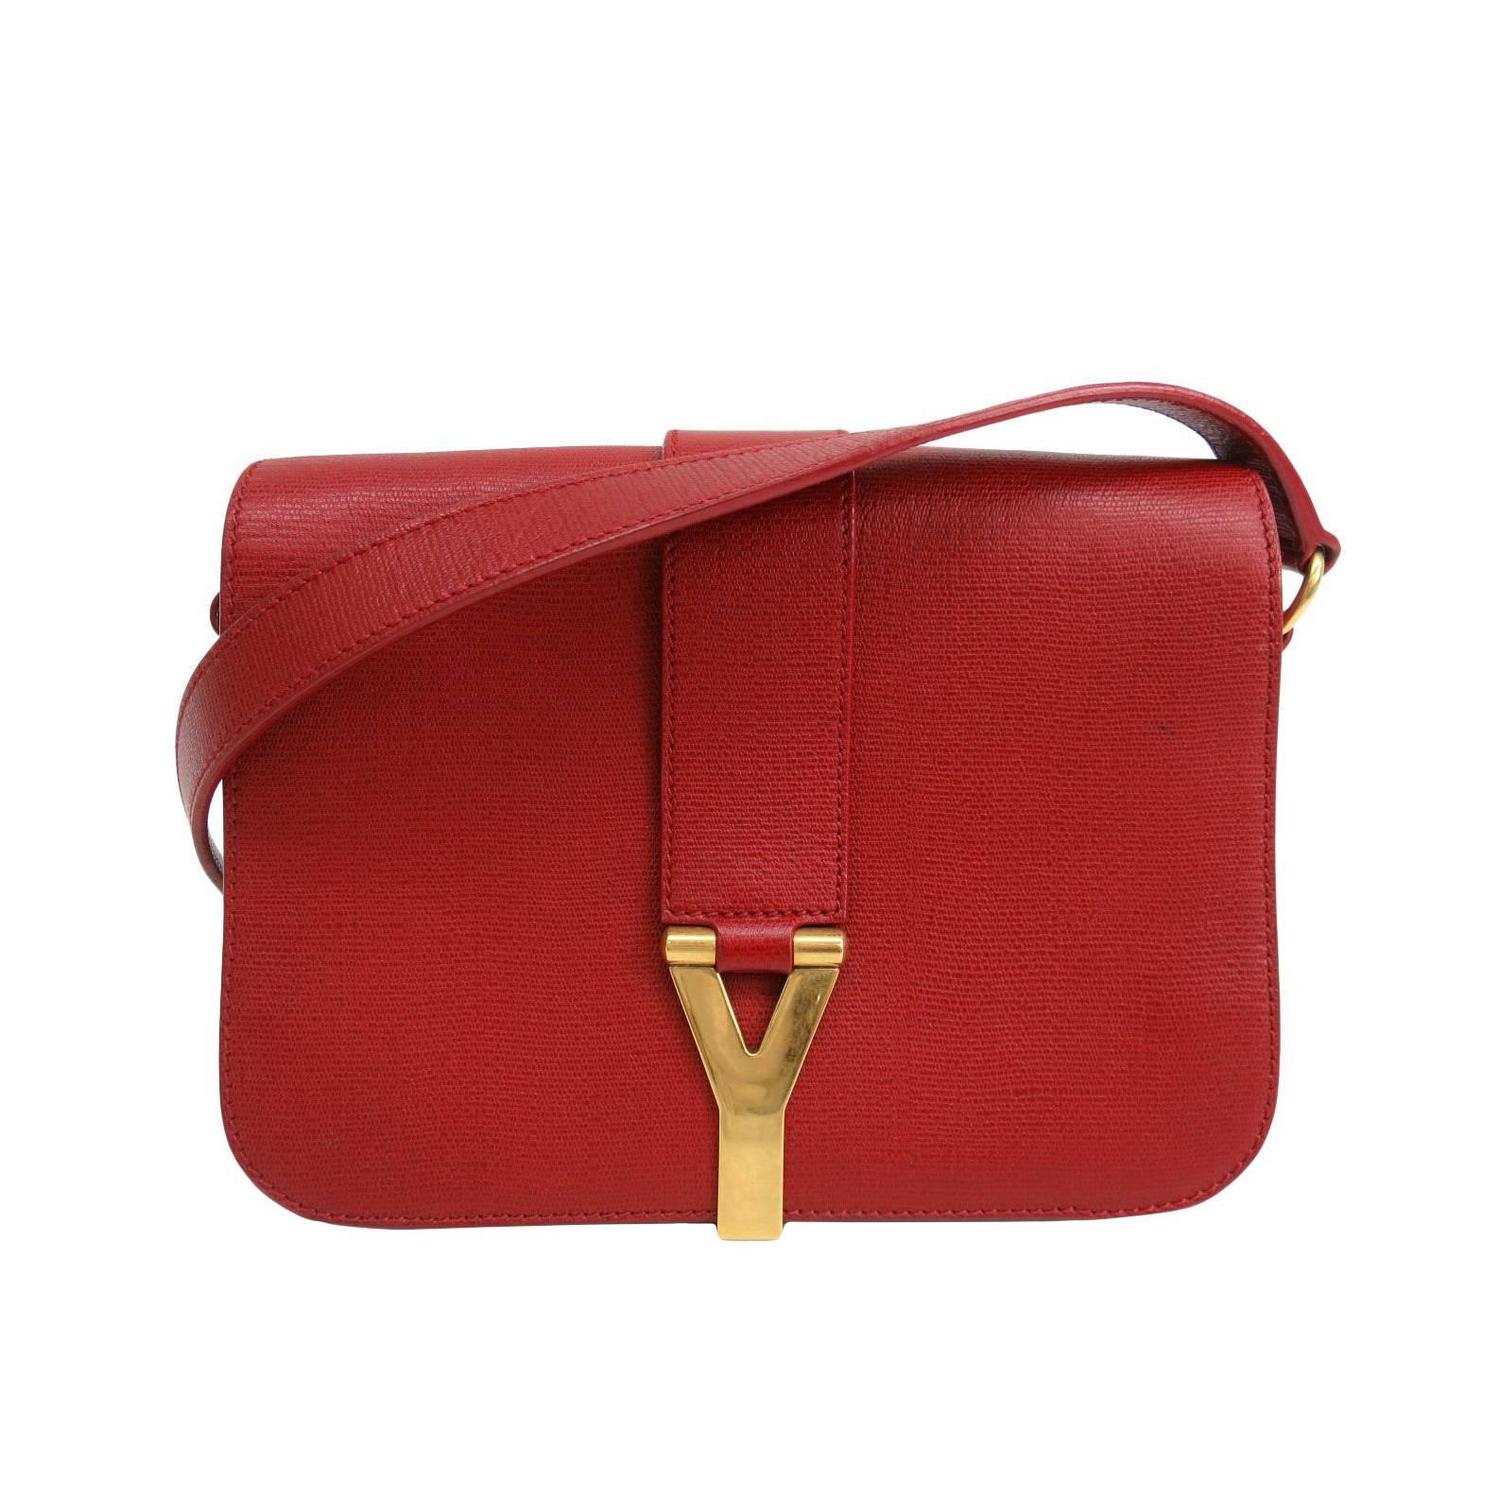 Yves Saint Laurent (YSL) Chyc Y Red Leather Gold Hardware ...  